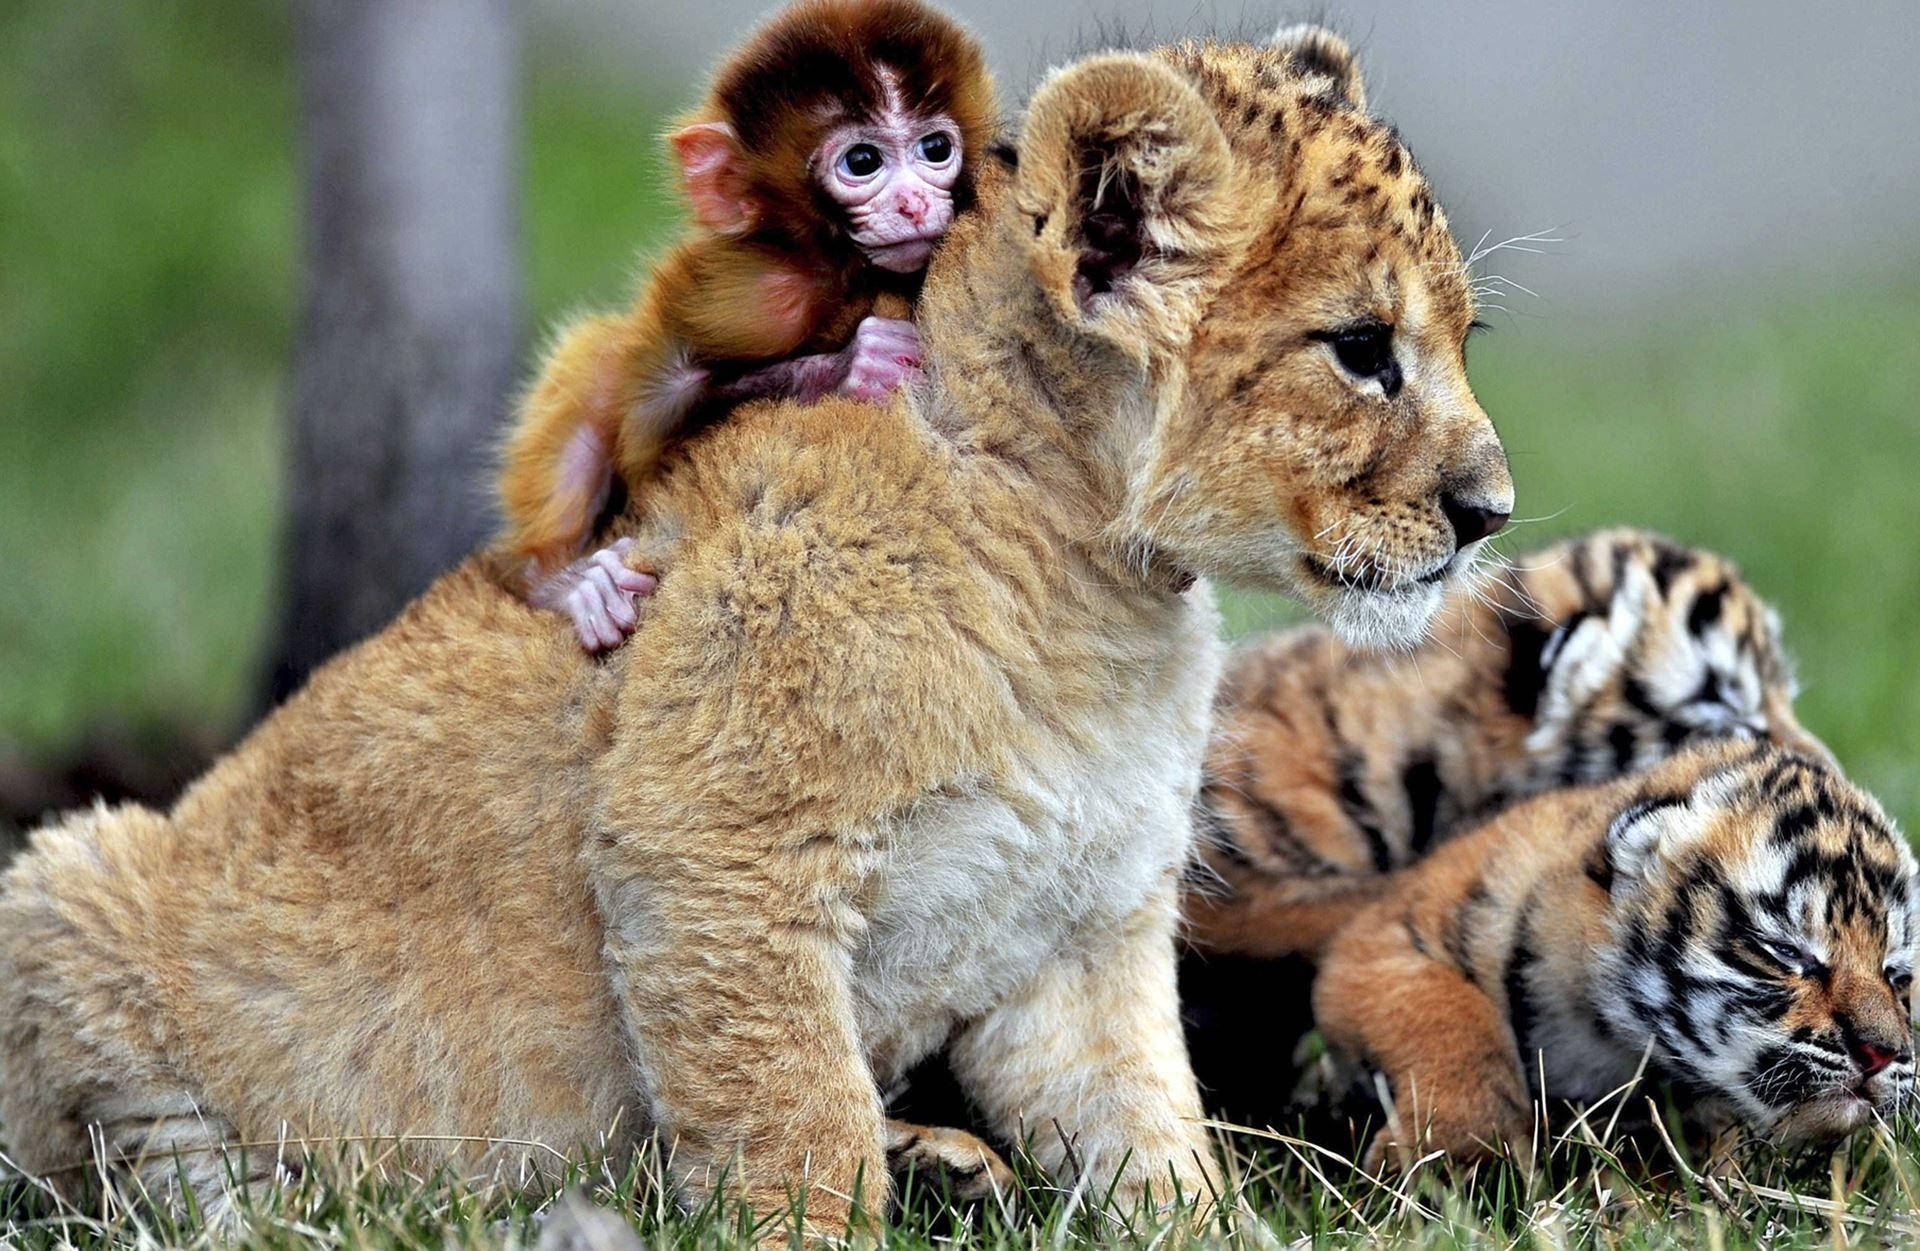 Baby Monkey And Lion Cub Wallpaper